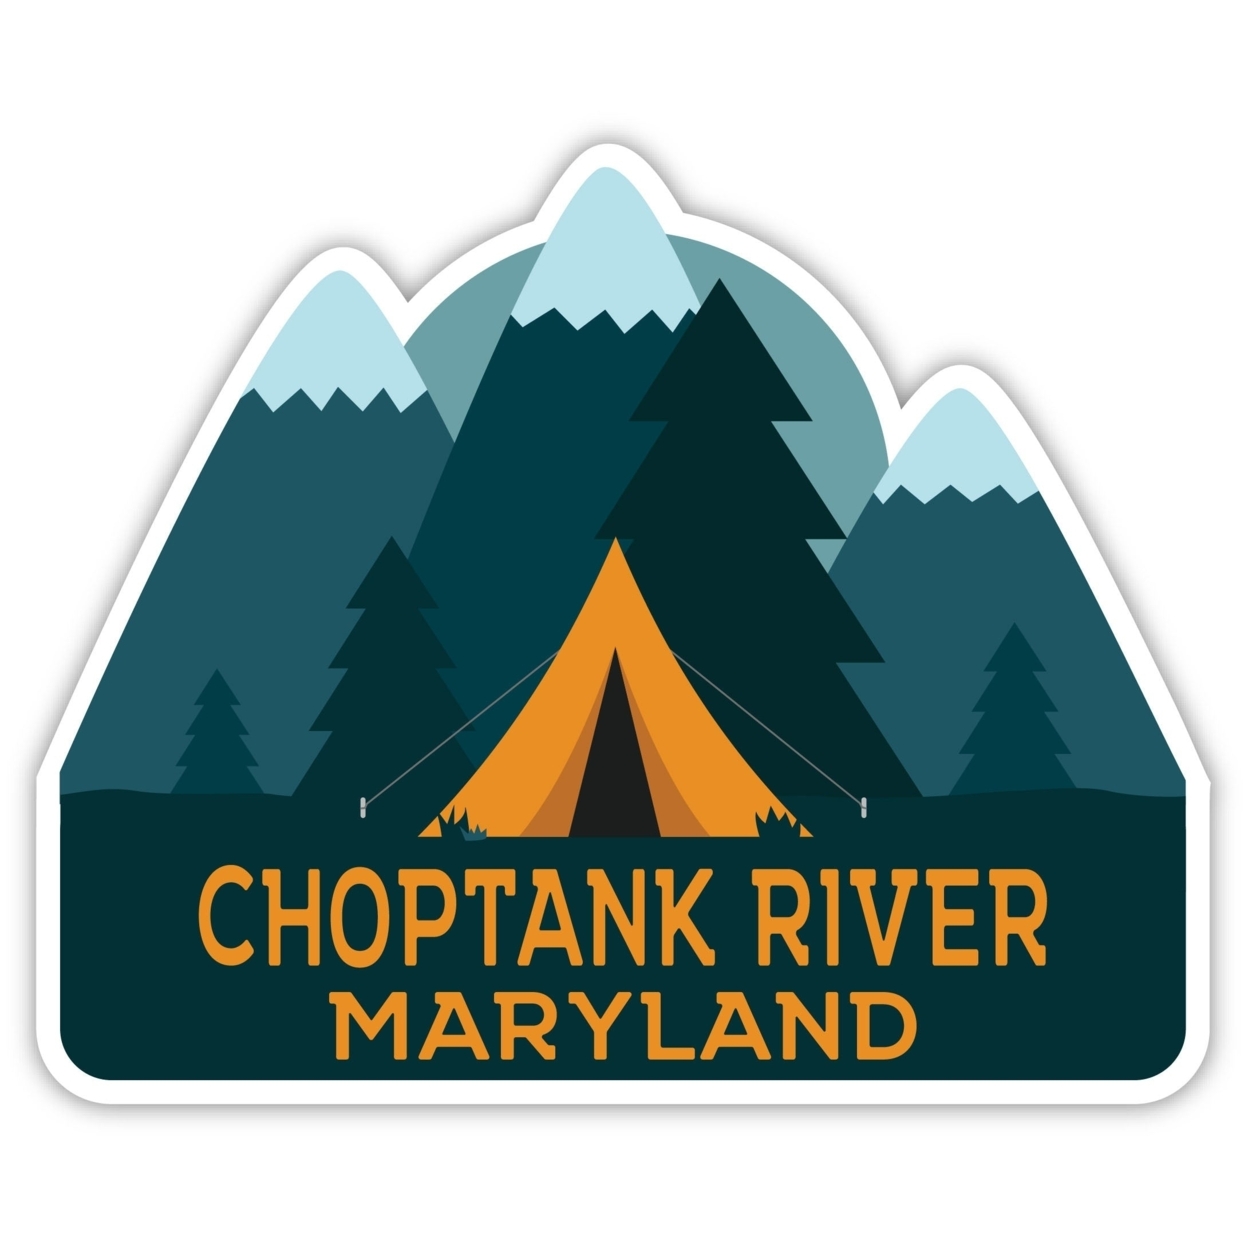 Choptank River Maryland Souvenir Decorative Stickers (Choose Theme And Size) - 4-Pack, 10-Inch, Tent